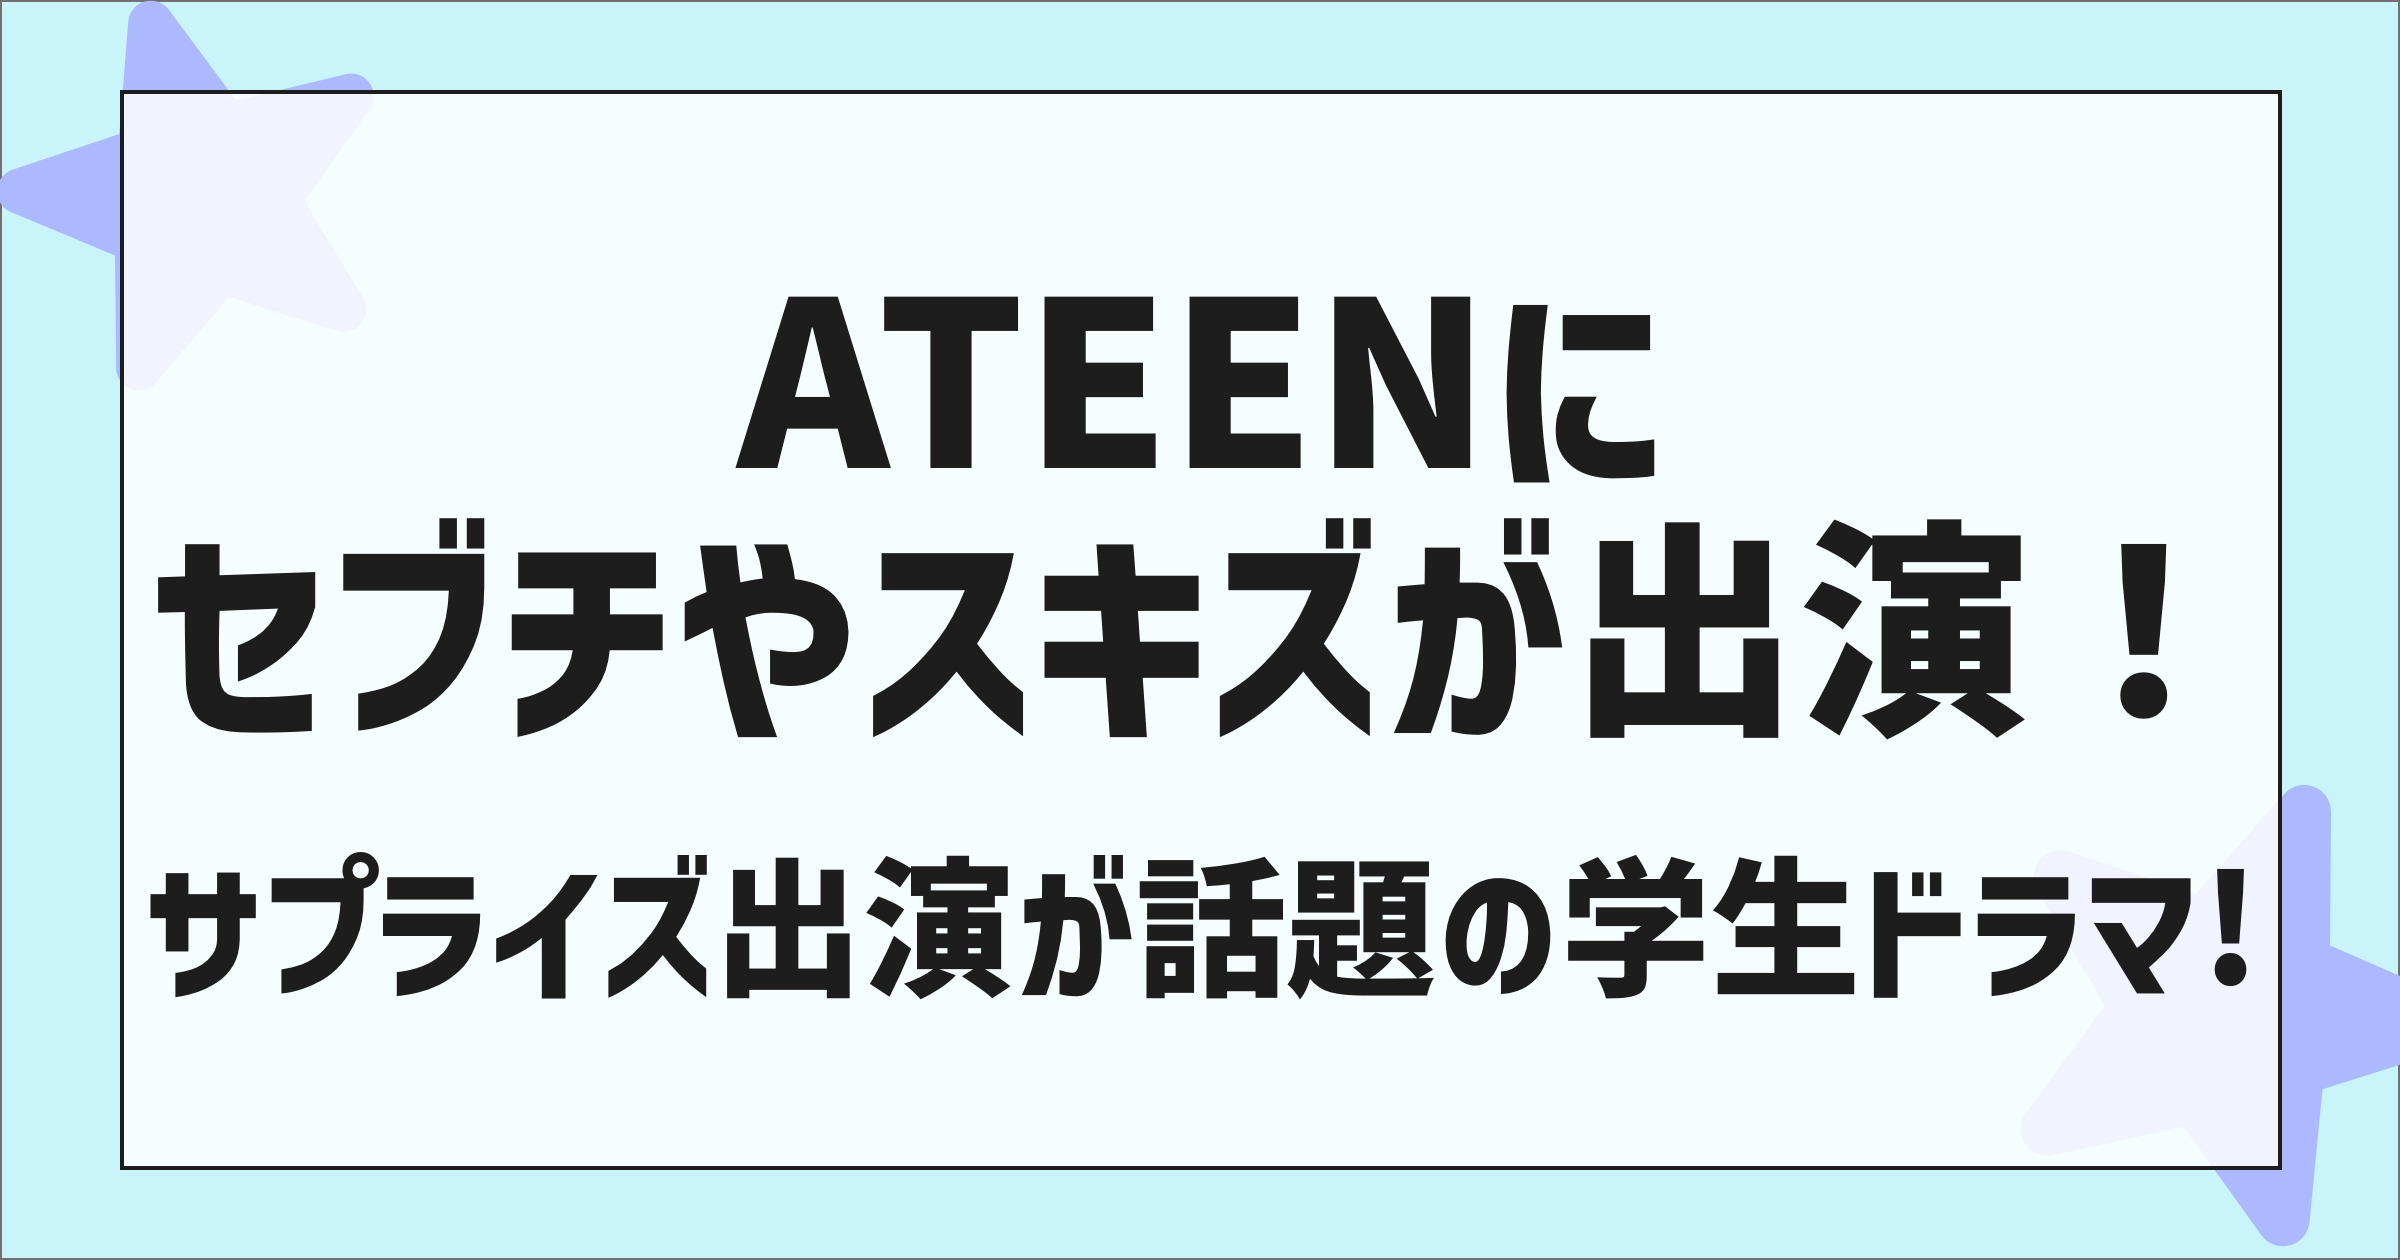 Sebuchi and Sukizu appear on A-Teen! A student drama with a hot topic of surprise appearances!